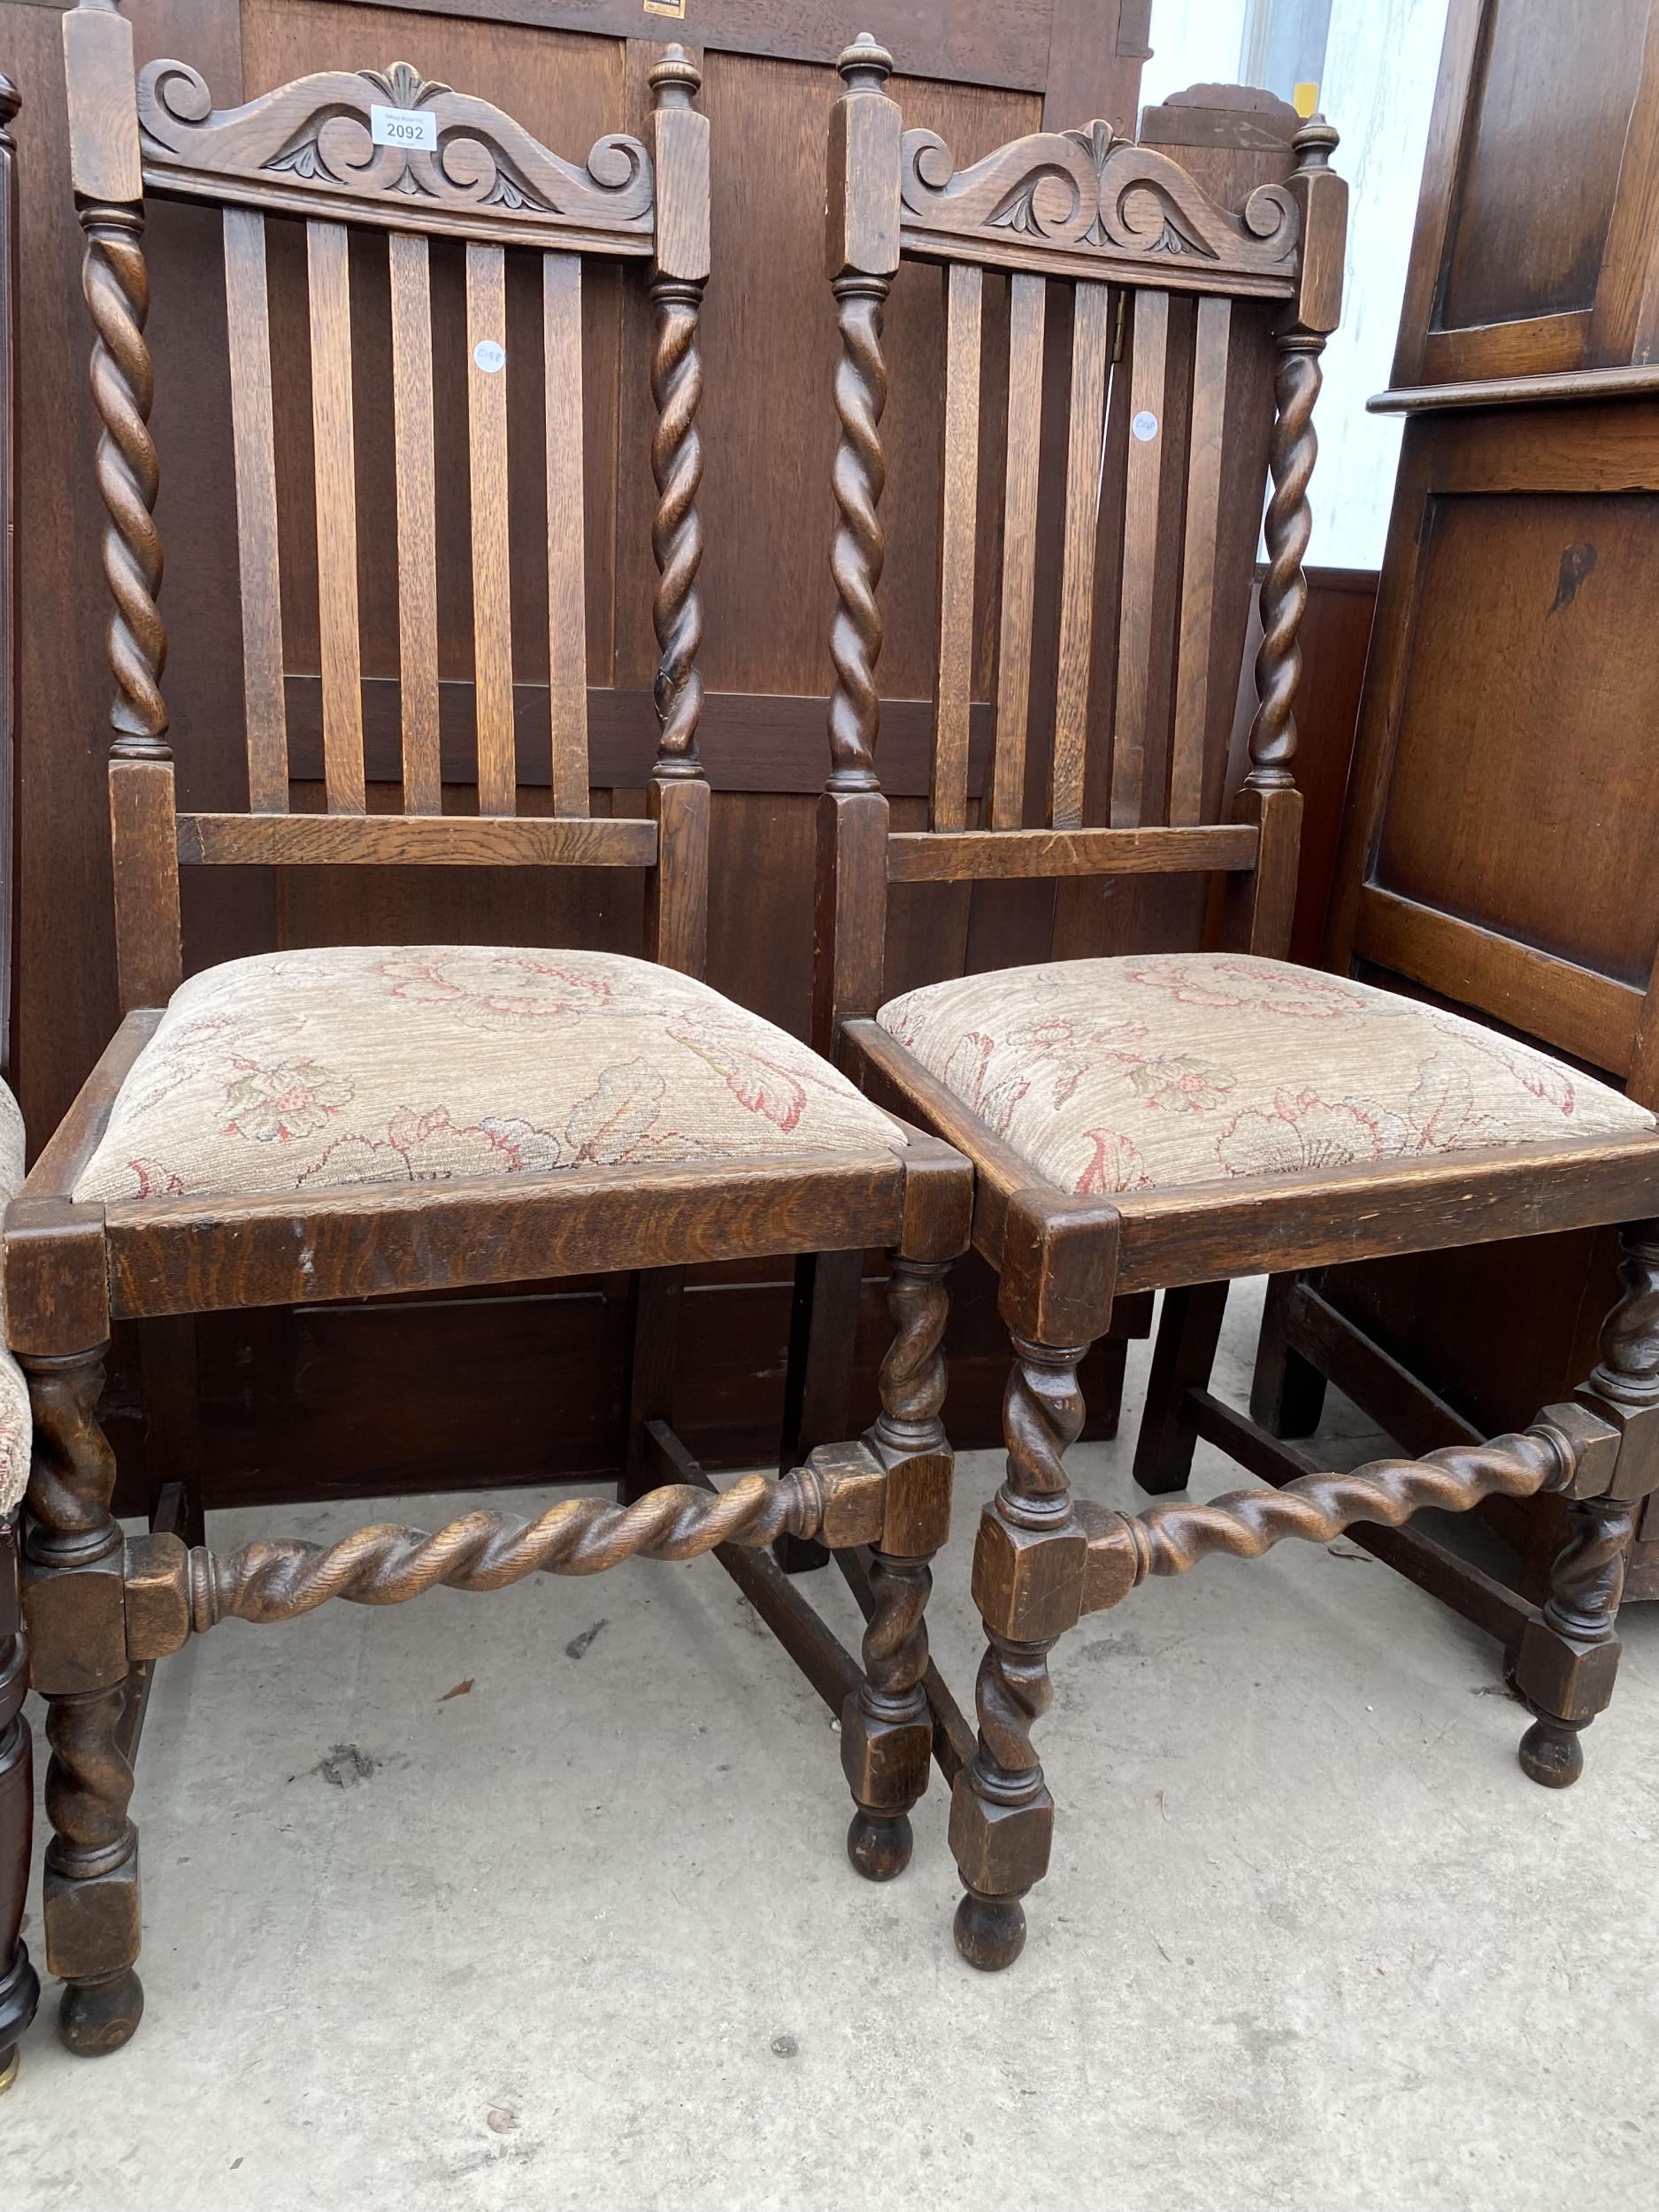 A PAIR OF EARLY 20TH CENTURY OAK BARLEYTWIST DINING CHAIRS - Image 2 of 2